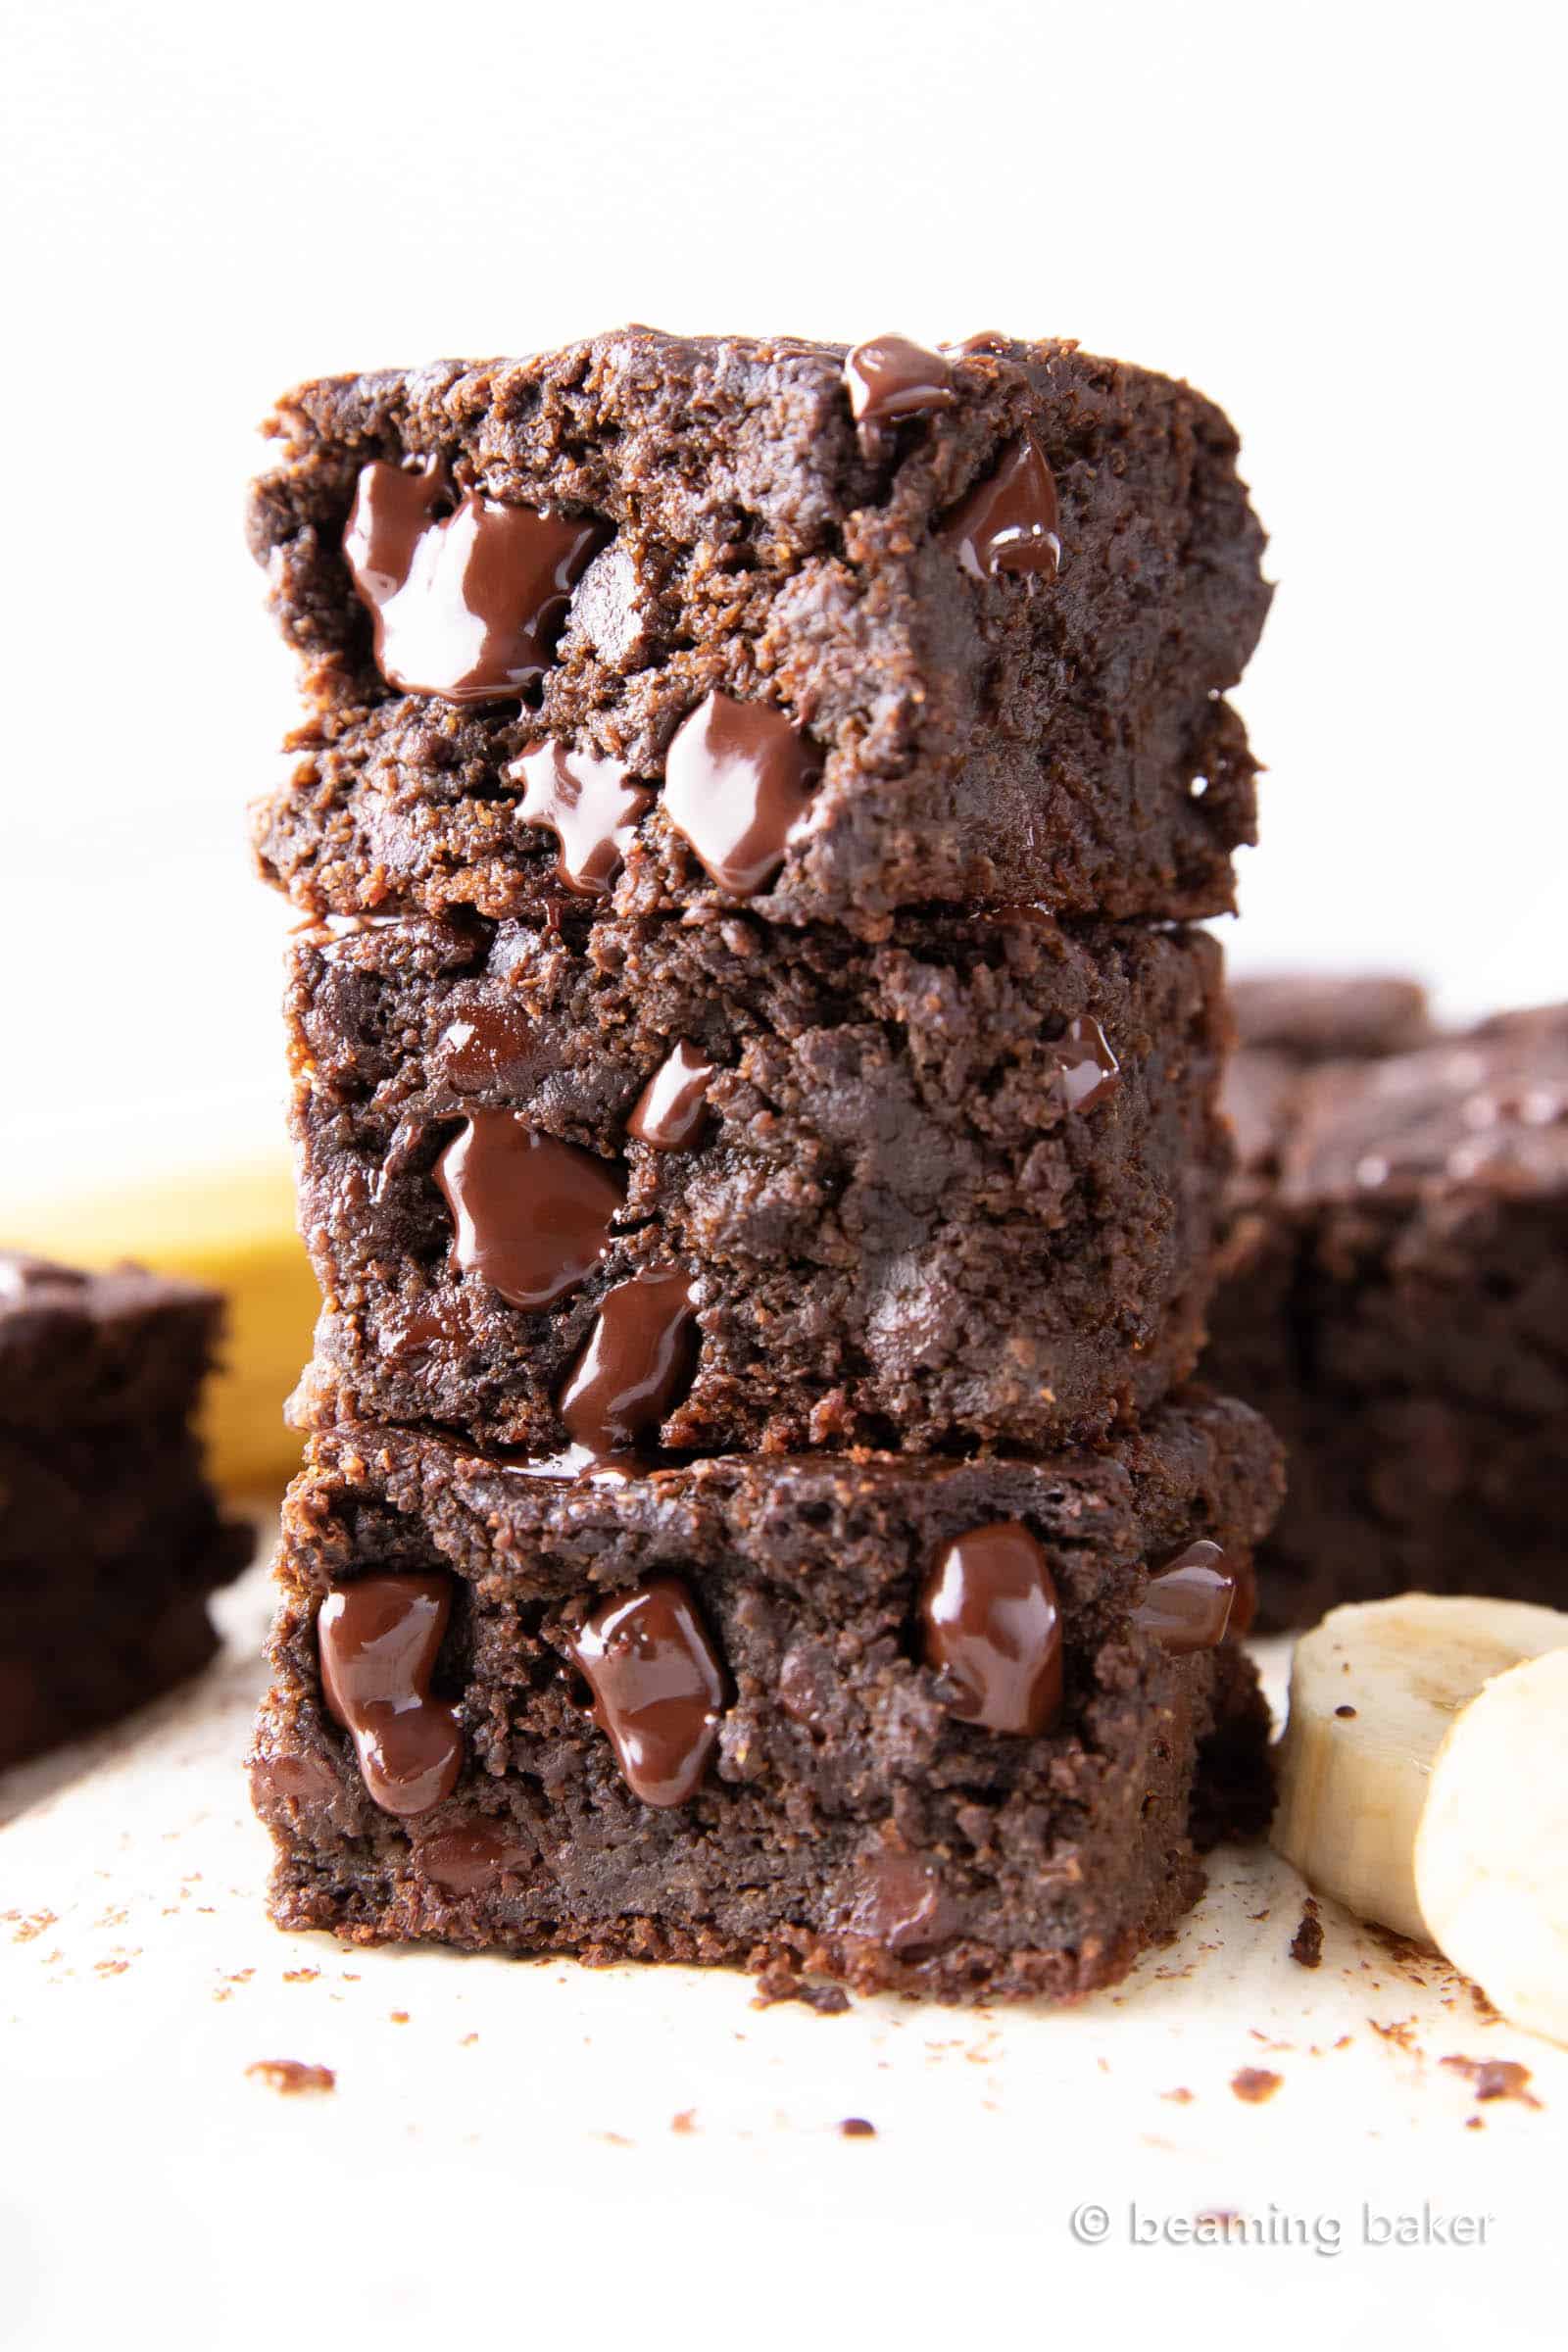 Vegan Banana Brownies: thick squares of super moist chocolate banana brownies. Melt-in-your-mouth fudgy and rich with a soft, tender crumb. The best banana brownie recipe! GF. #Vegan #Banana #Brownies #BananaBrownies | Recipe at BeamingBaker.com